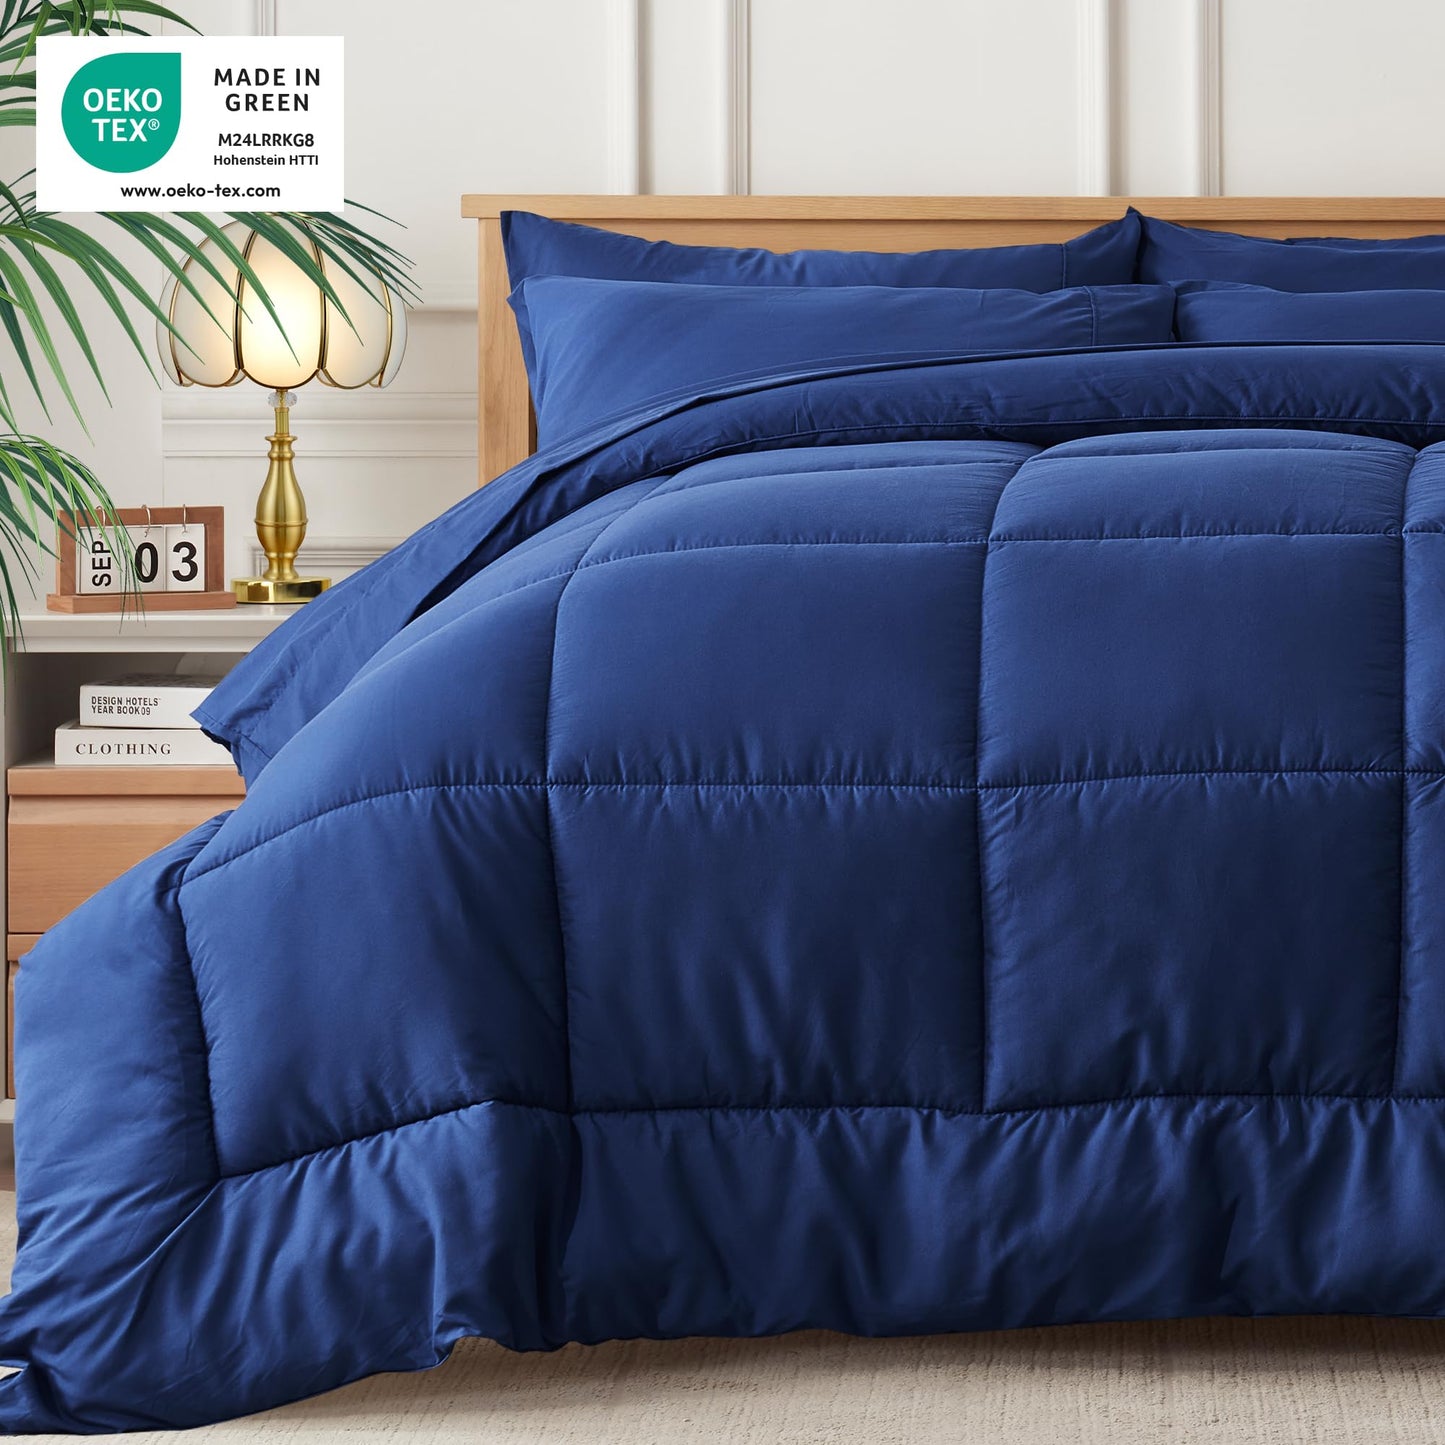 Newspin Twin Bed in a Bag - 5 Pieces Blue Comforter Set, Lightweight All Season Bedding Comforter Set with Comforter, Flat Sheet, Fitted Sheet, Pillowcases & Shams